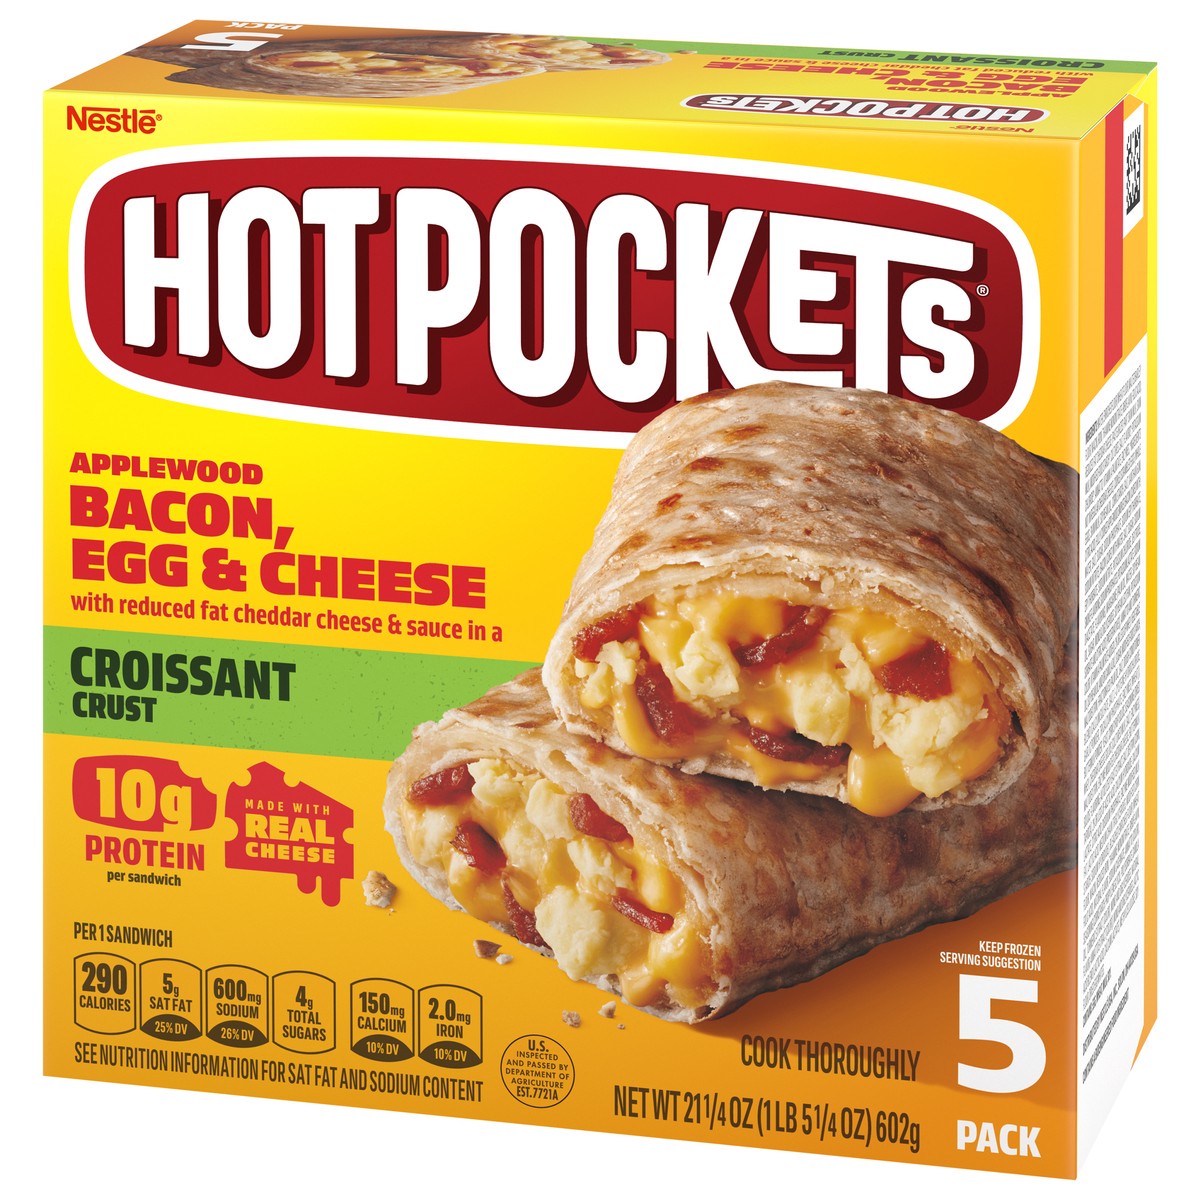 slide 3 of 9, Hot Pockets Applewood Bacon, Egg & Cheese Croissant Crust Frozen Breakfast Sandwiches, Breakfast Hot Pockets Made with Real Reduced Fat Cheddar Cheese, 5 Count, 21.25 oz